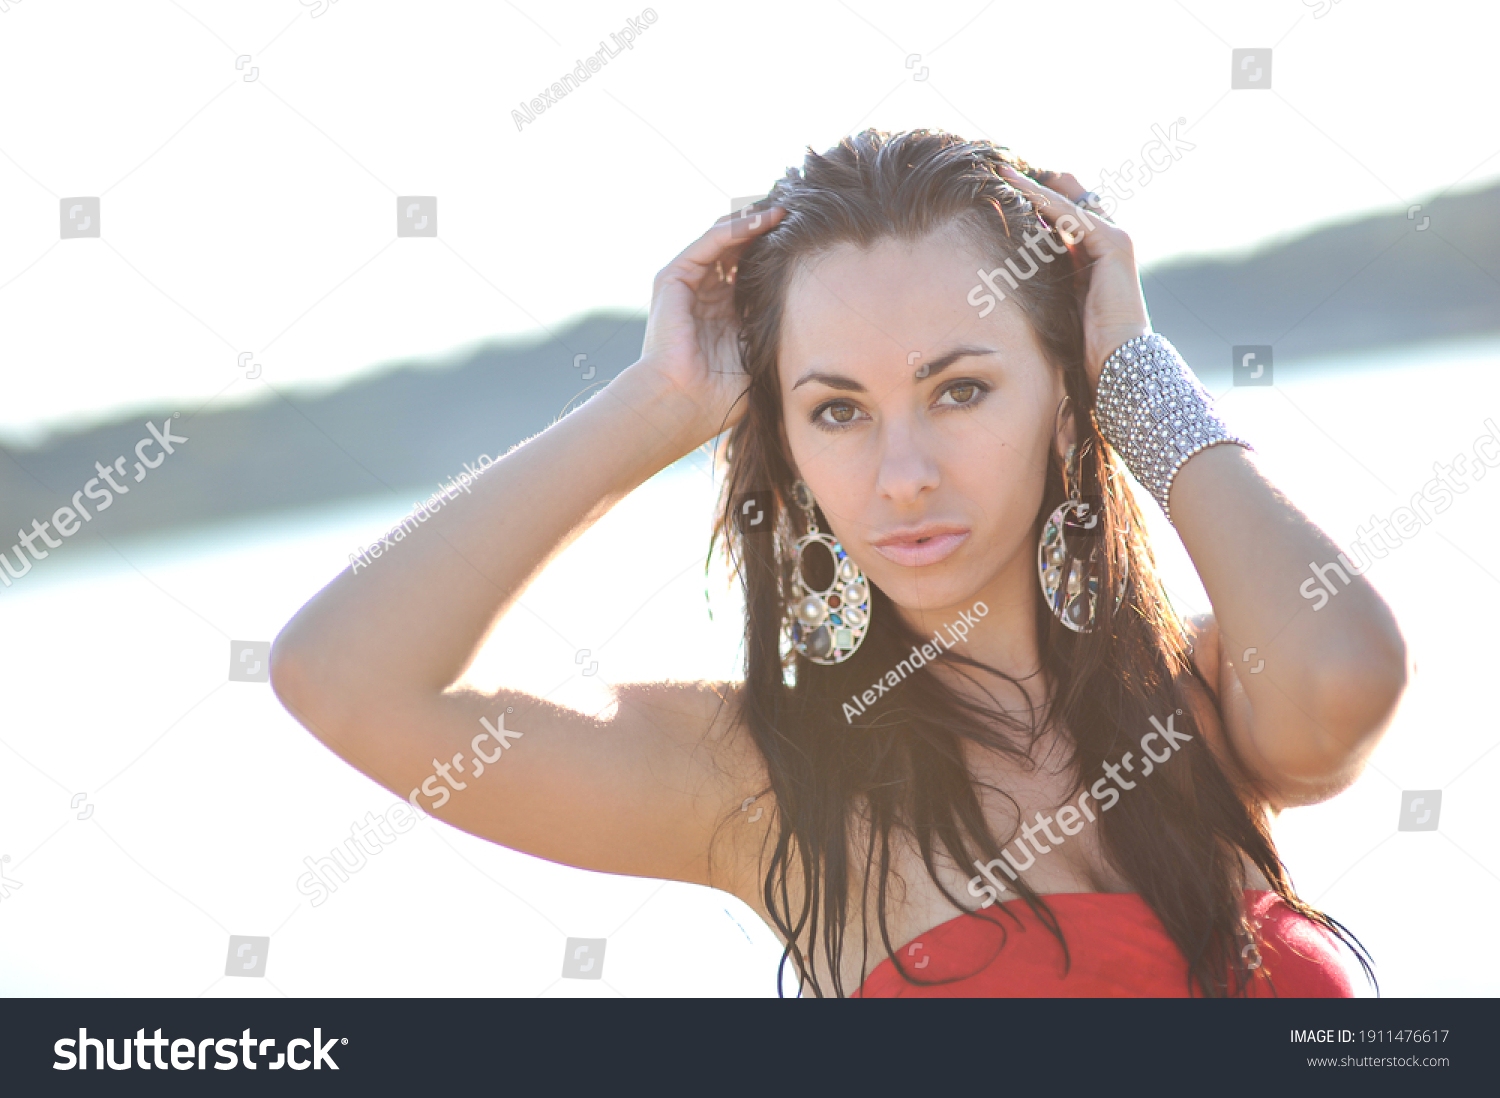 lifestyle photo of woman with perfect hair.walking alone at the beach.Sensual young girl relaxing.Colorful filter.glam style,teen trend outfit, positive mood,smiling,amazing model girl,long hair #1911476617